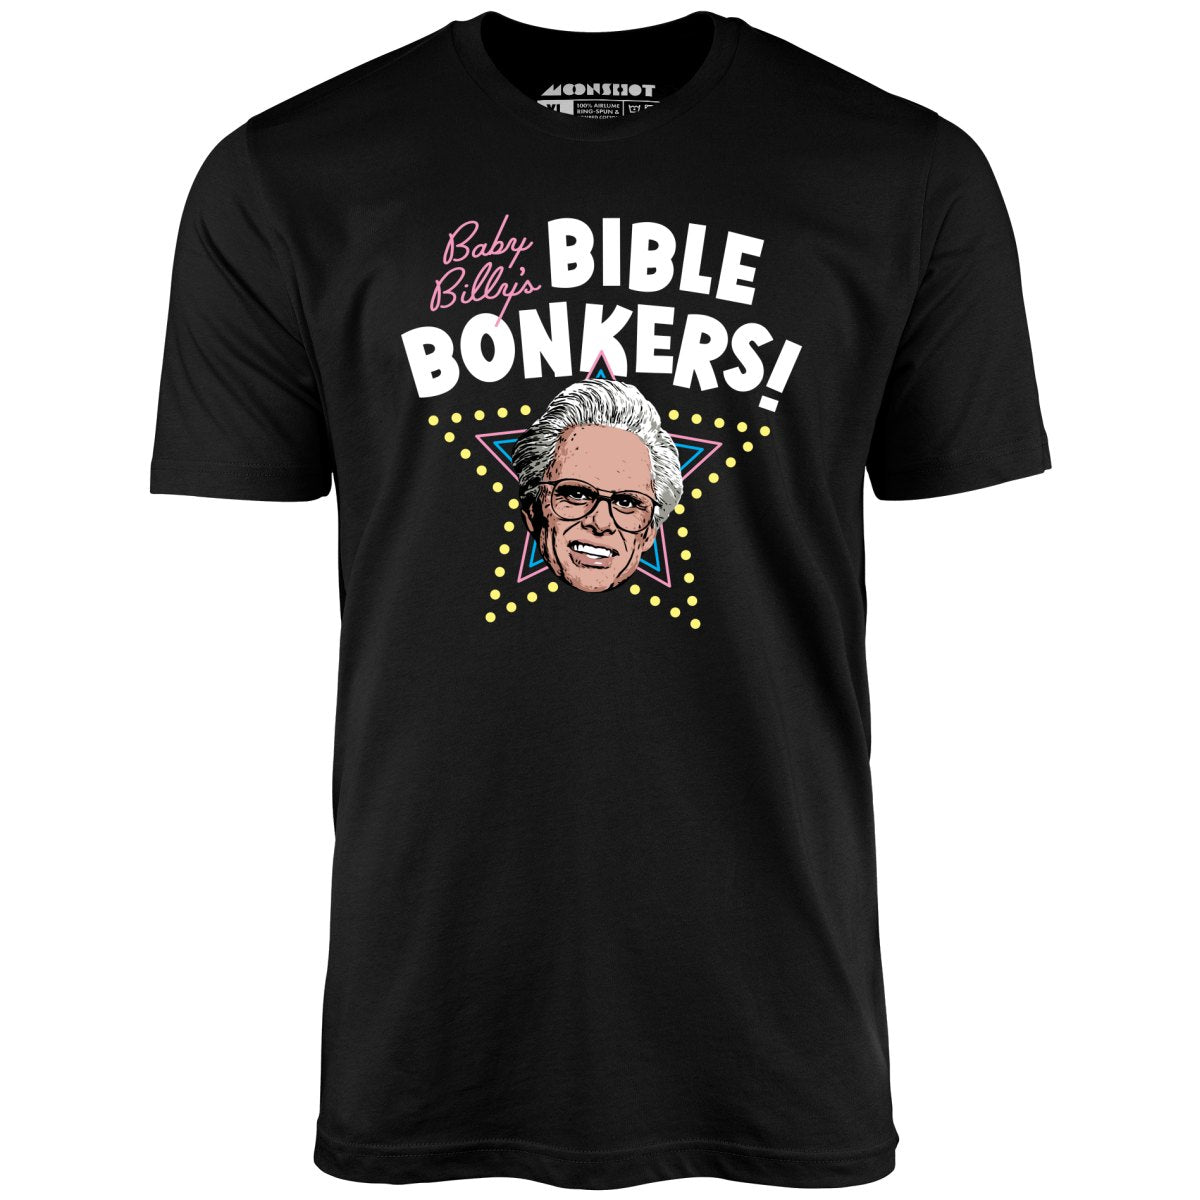 Baby Billy's Bible Bonkers - Unisex T-Shirt